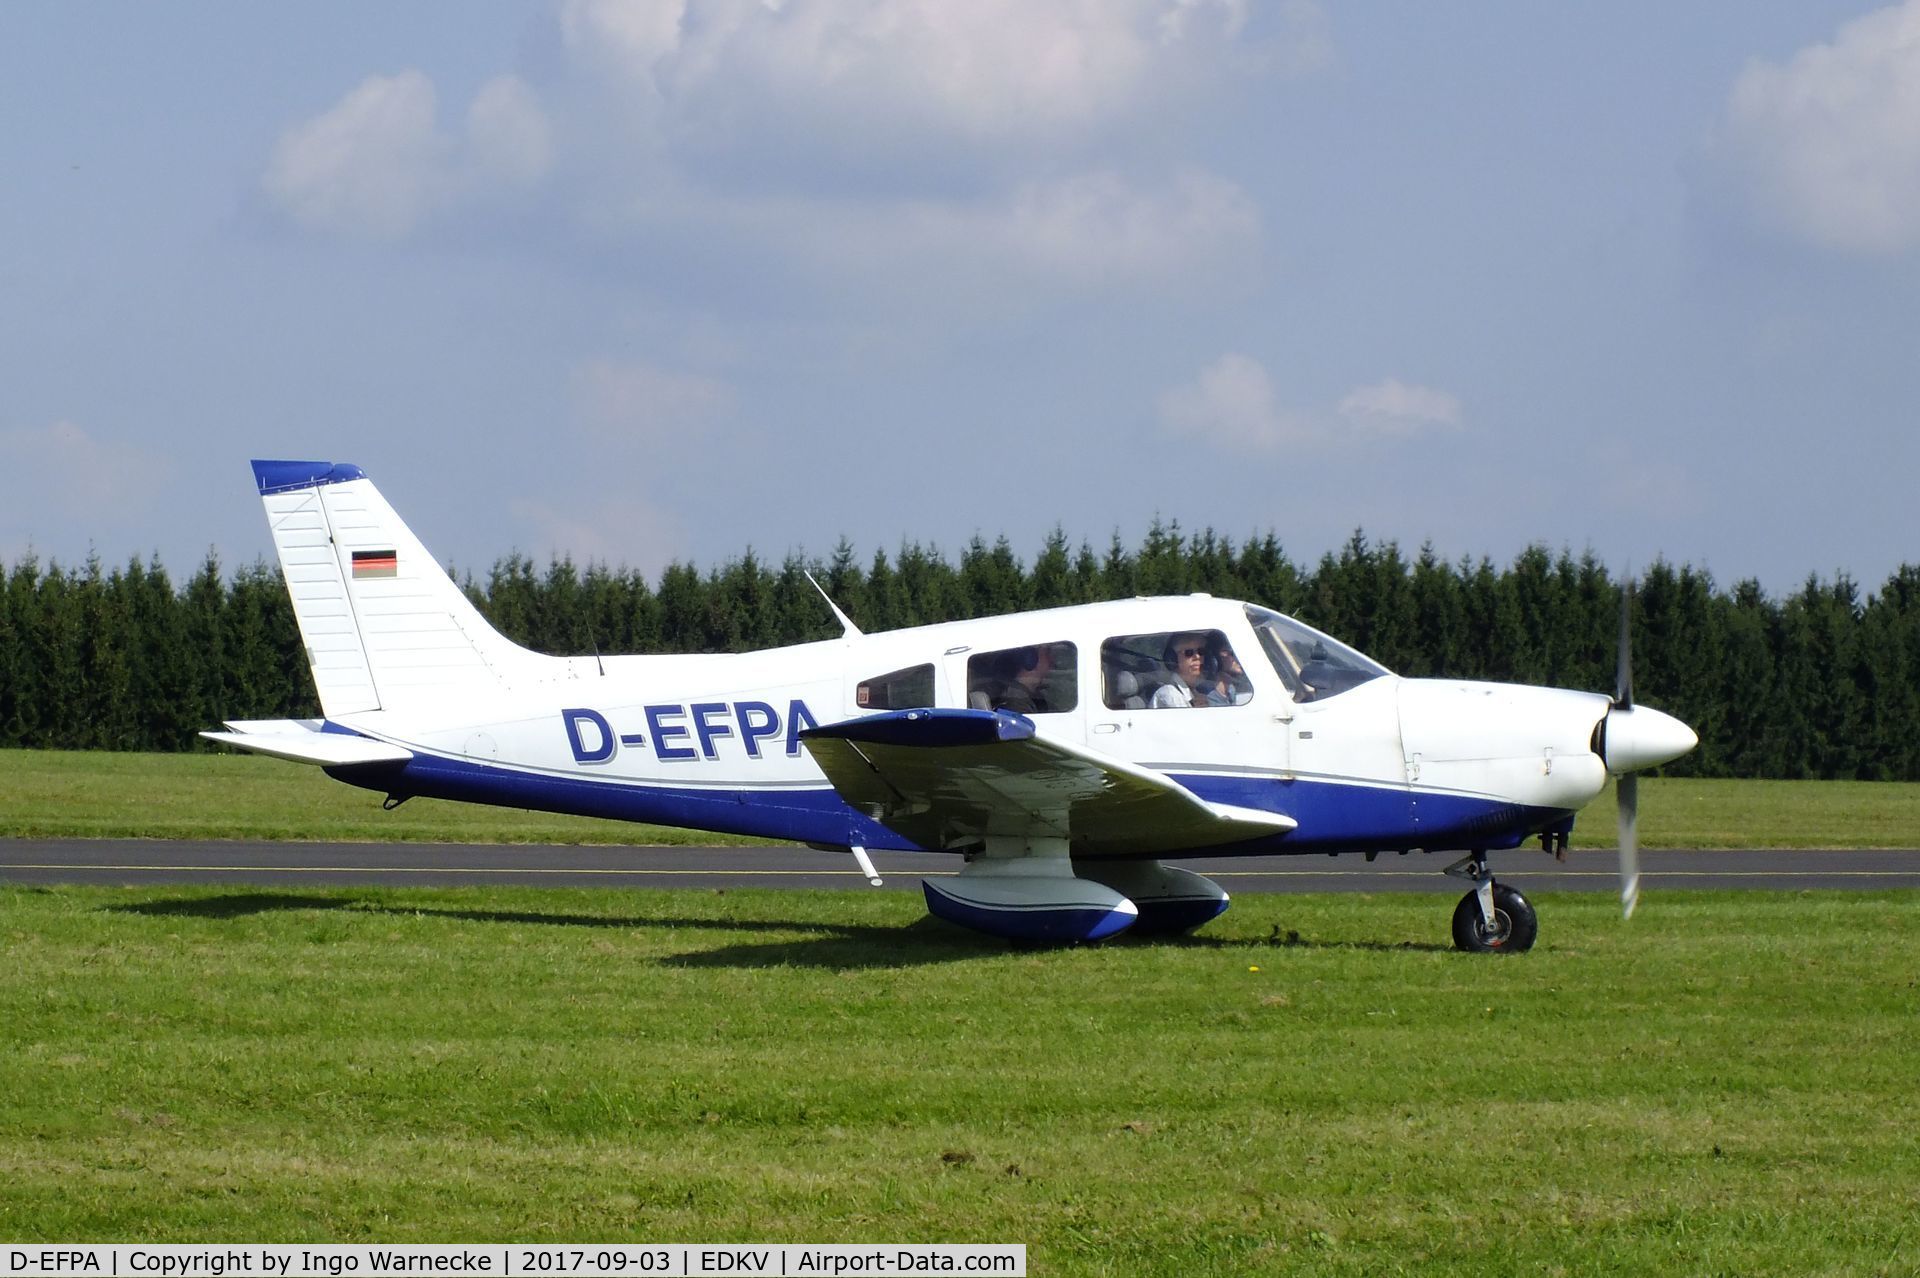 D-EFPA, 1978 Piper PA-28-181 C/N 28-90077, Piper PA-28-181 Archer II at the Dahlemer Binz 60th jubilee airfield display